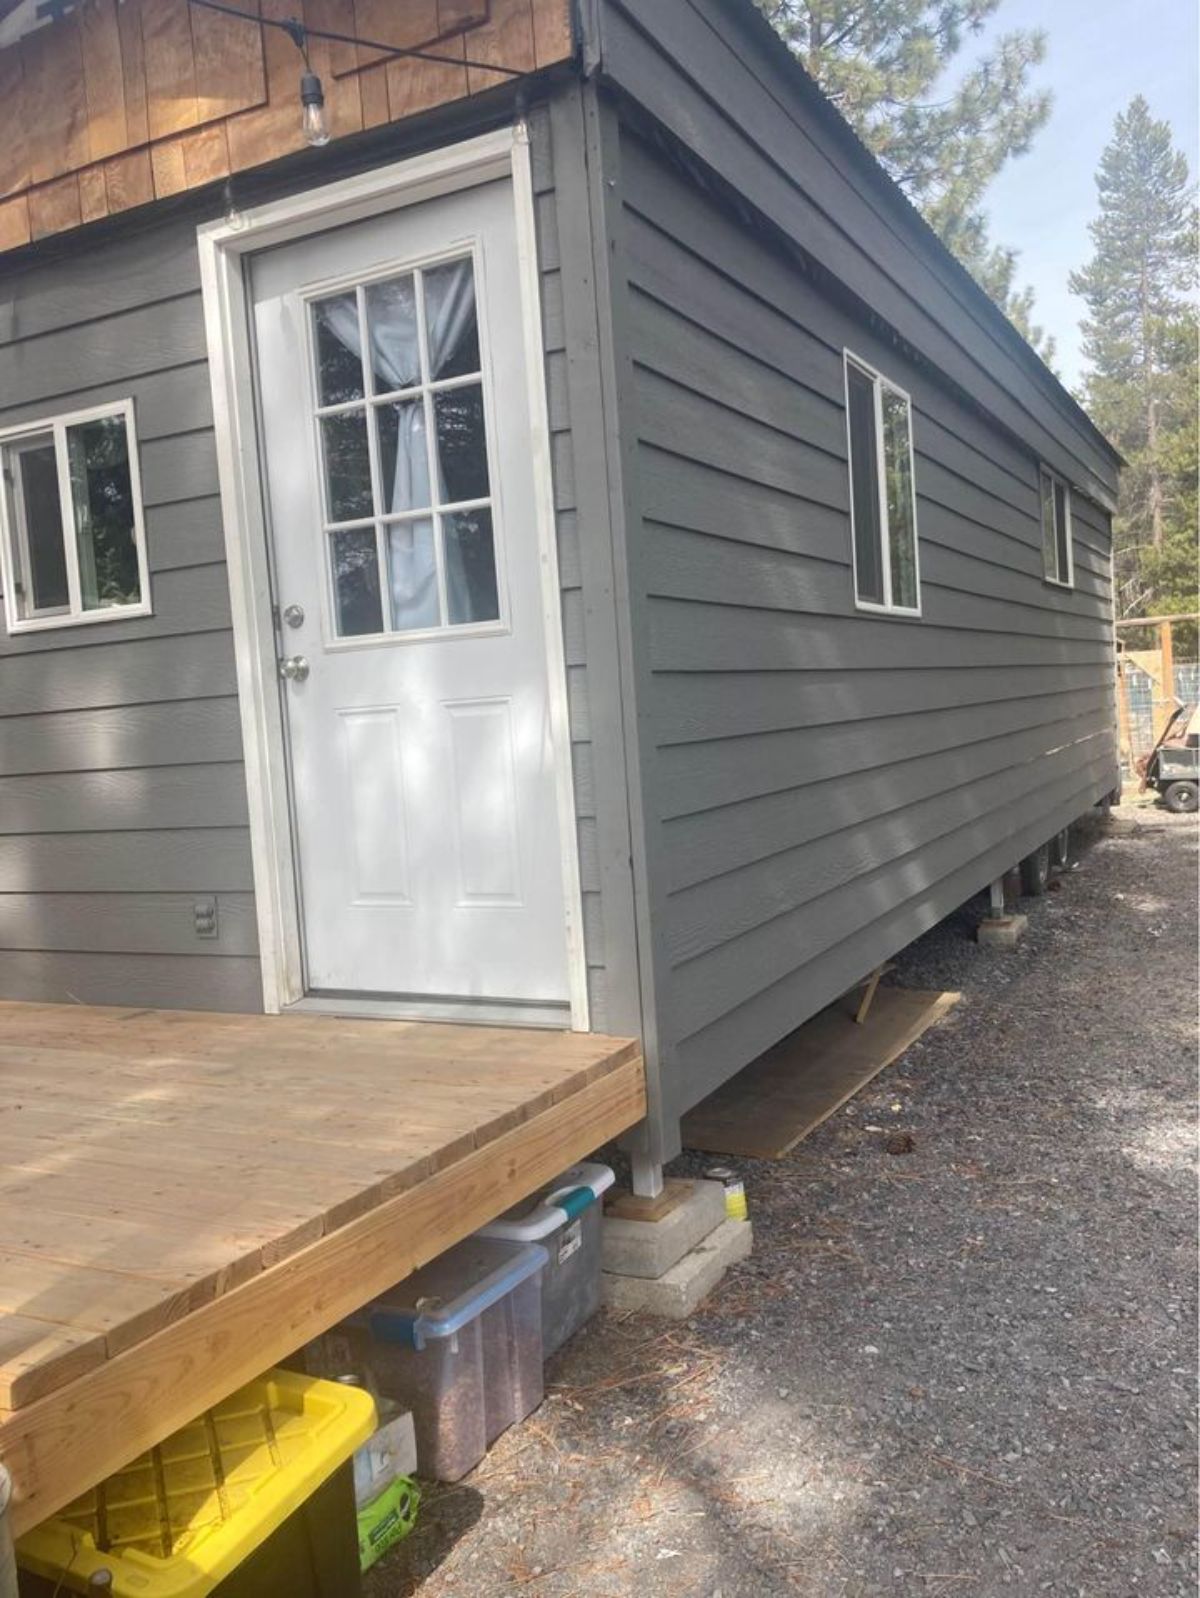 Side view image of of 240 sf Tiny House from outside